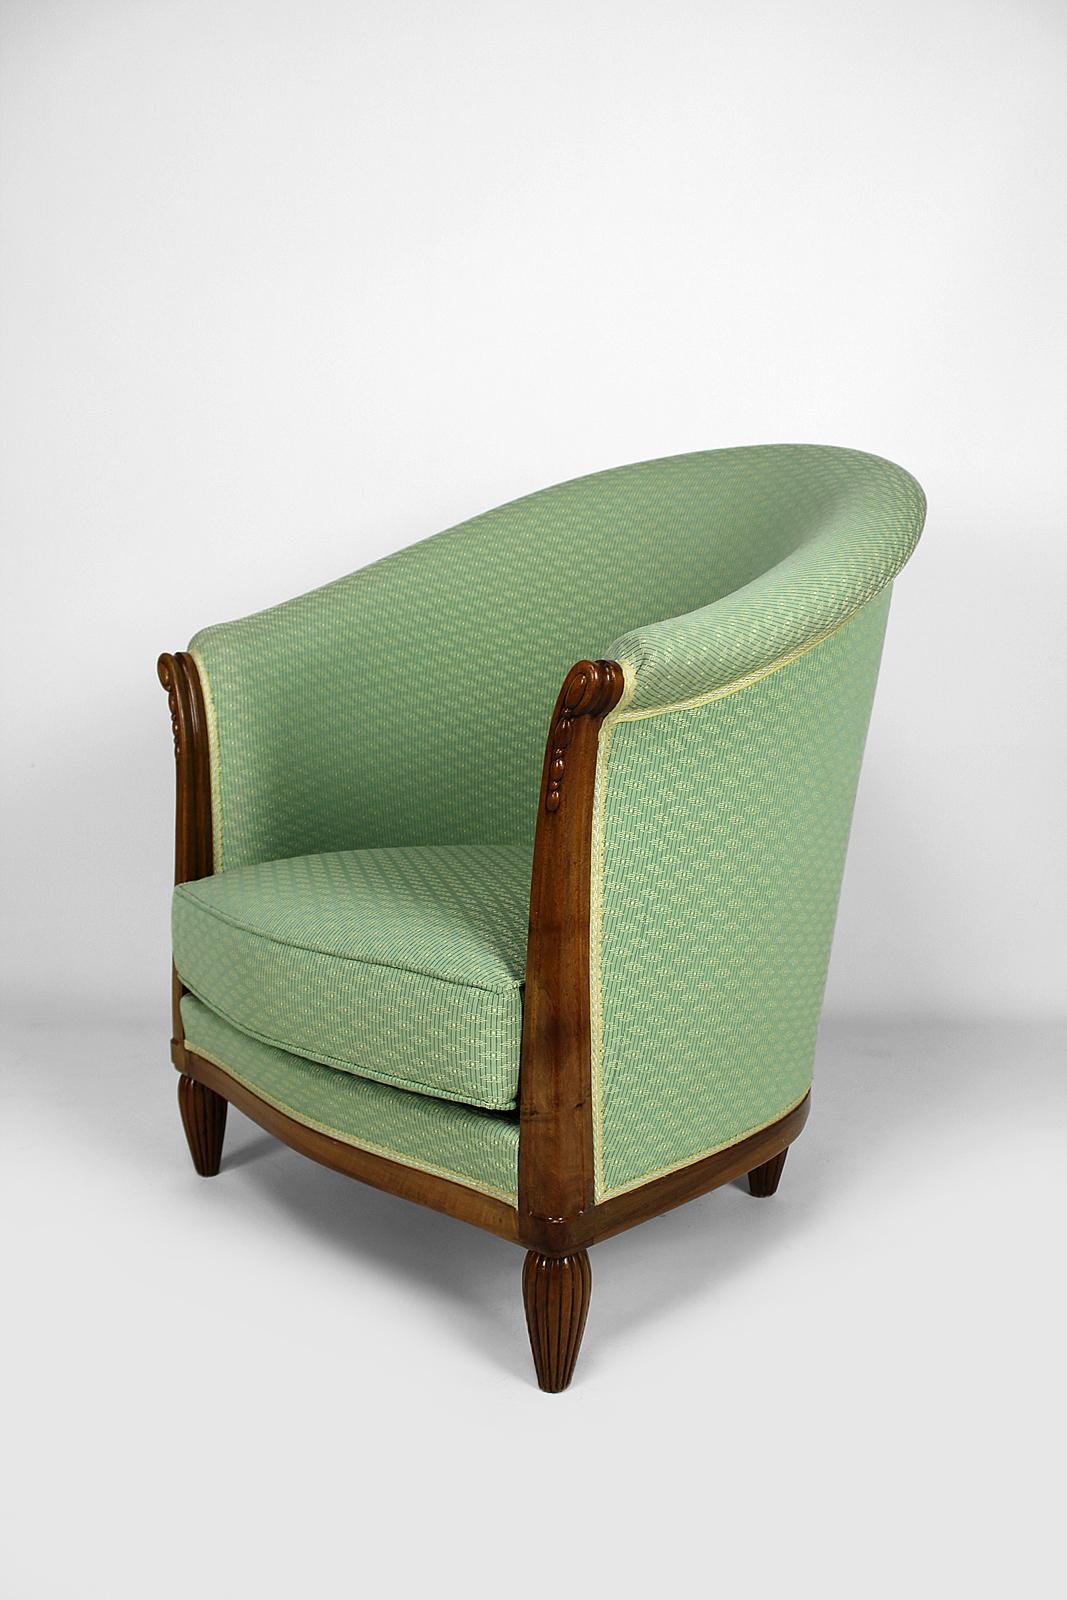 Superb Gauthier-Poinsignon armchair with walnut structure and beautiful green fabric trim. Tapered feet.

Art Deco style, France, circa 1920-1930.
By the Ateliers Gauthier-Poinsignon.

In very good condition.

Dimensions:
height 84 cm
width 75